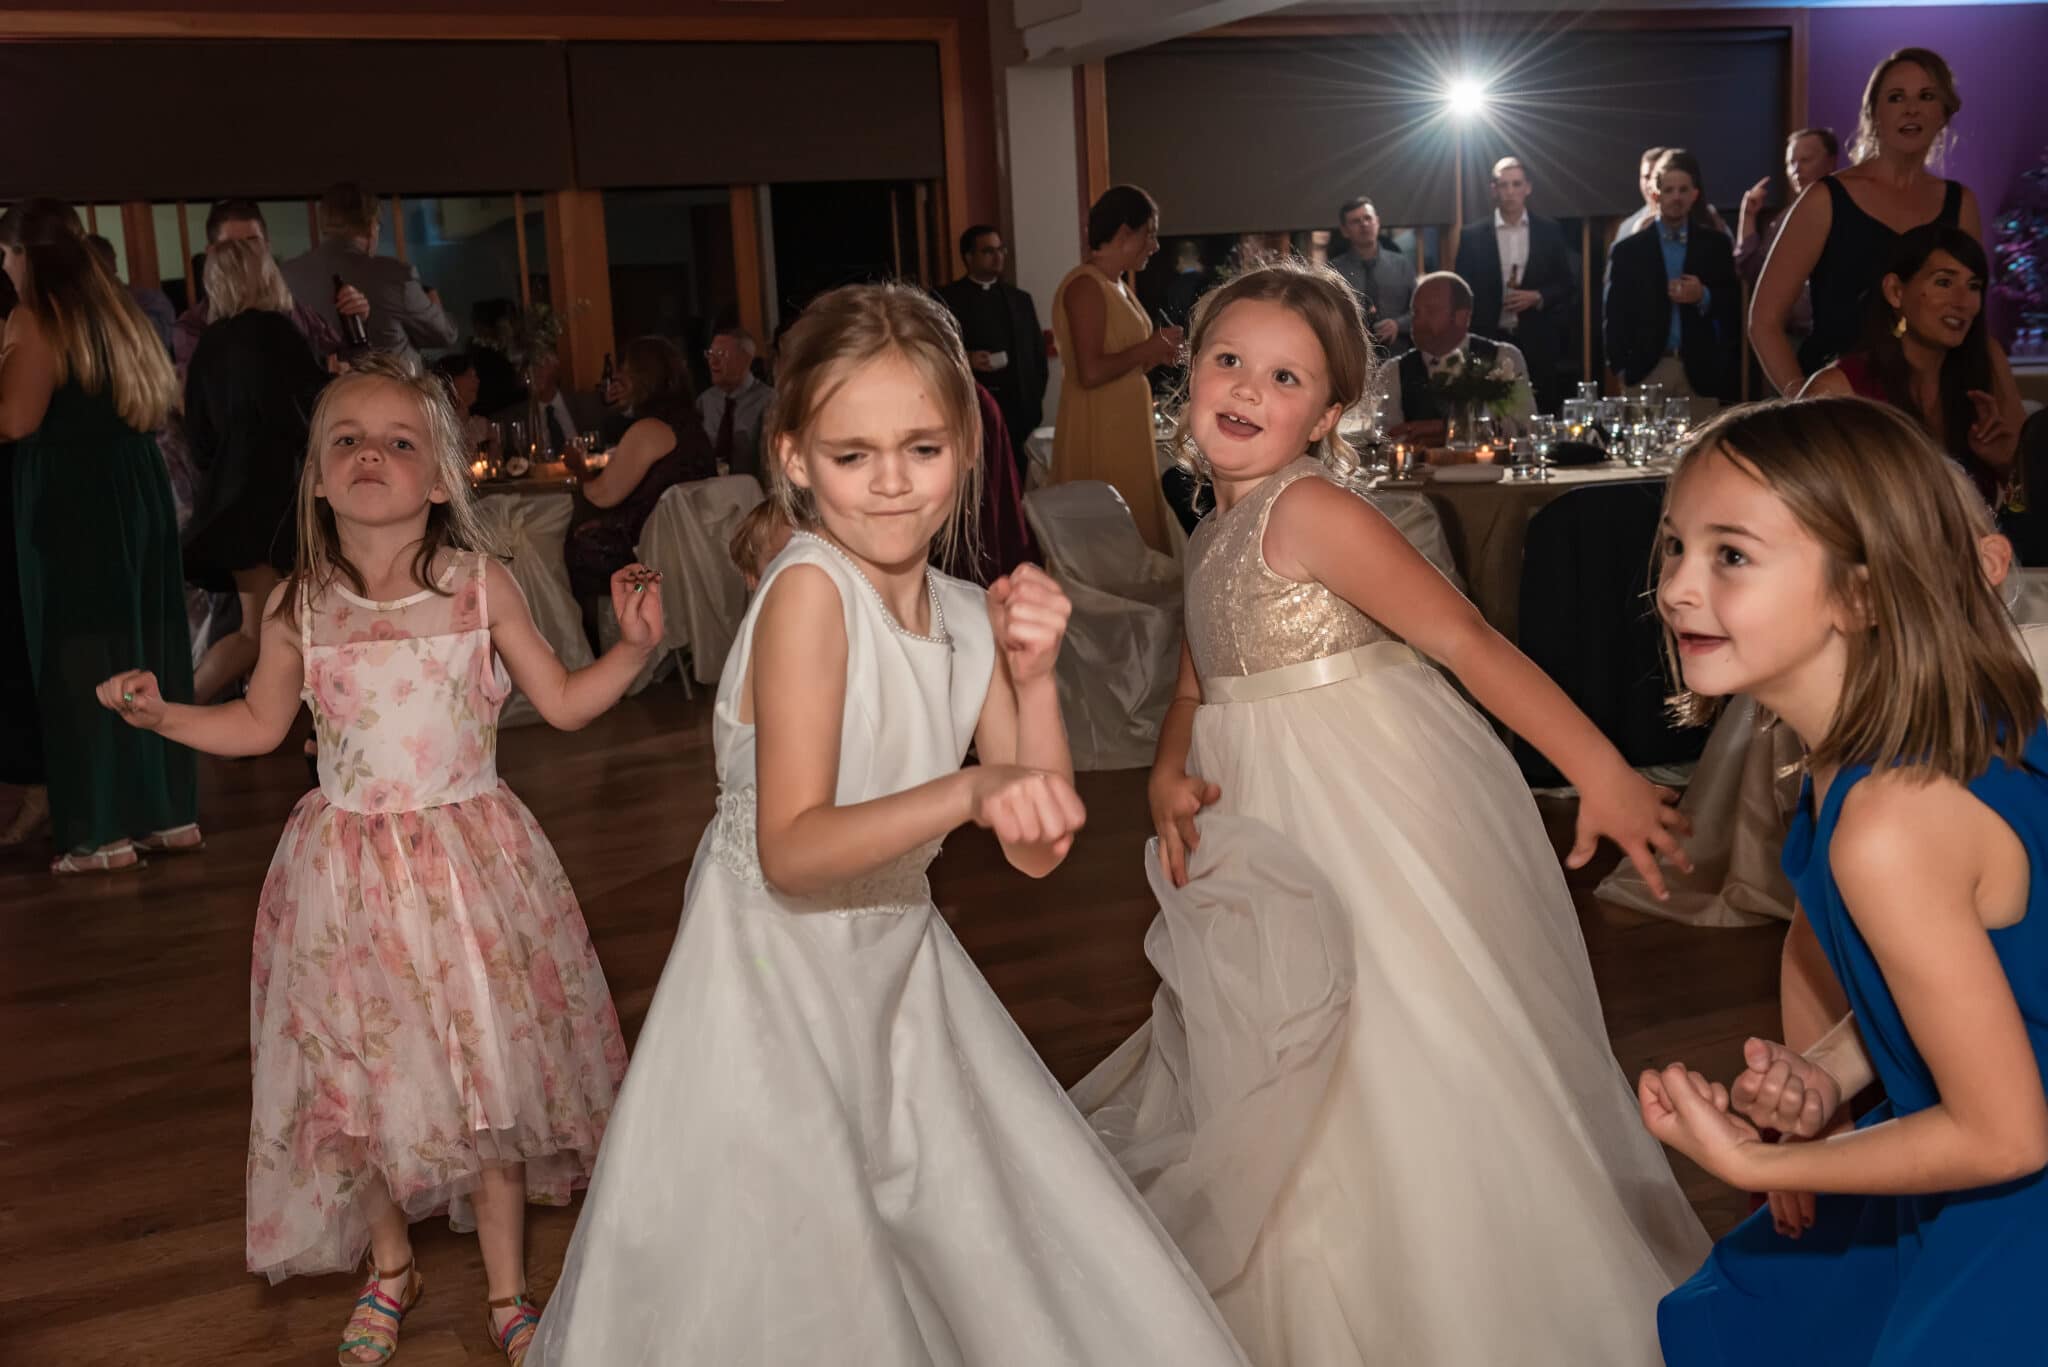 Flower Girls show off their best dance moves at a reception in Golden, Colorado.